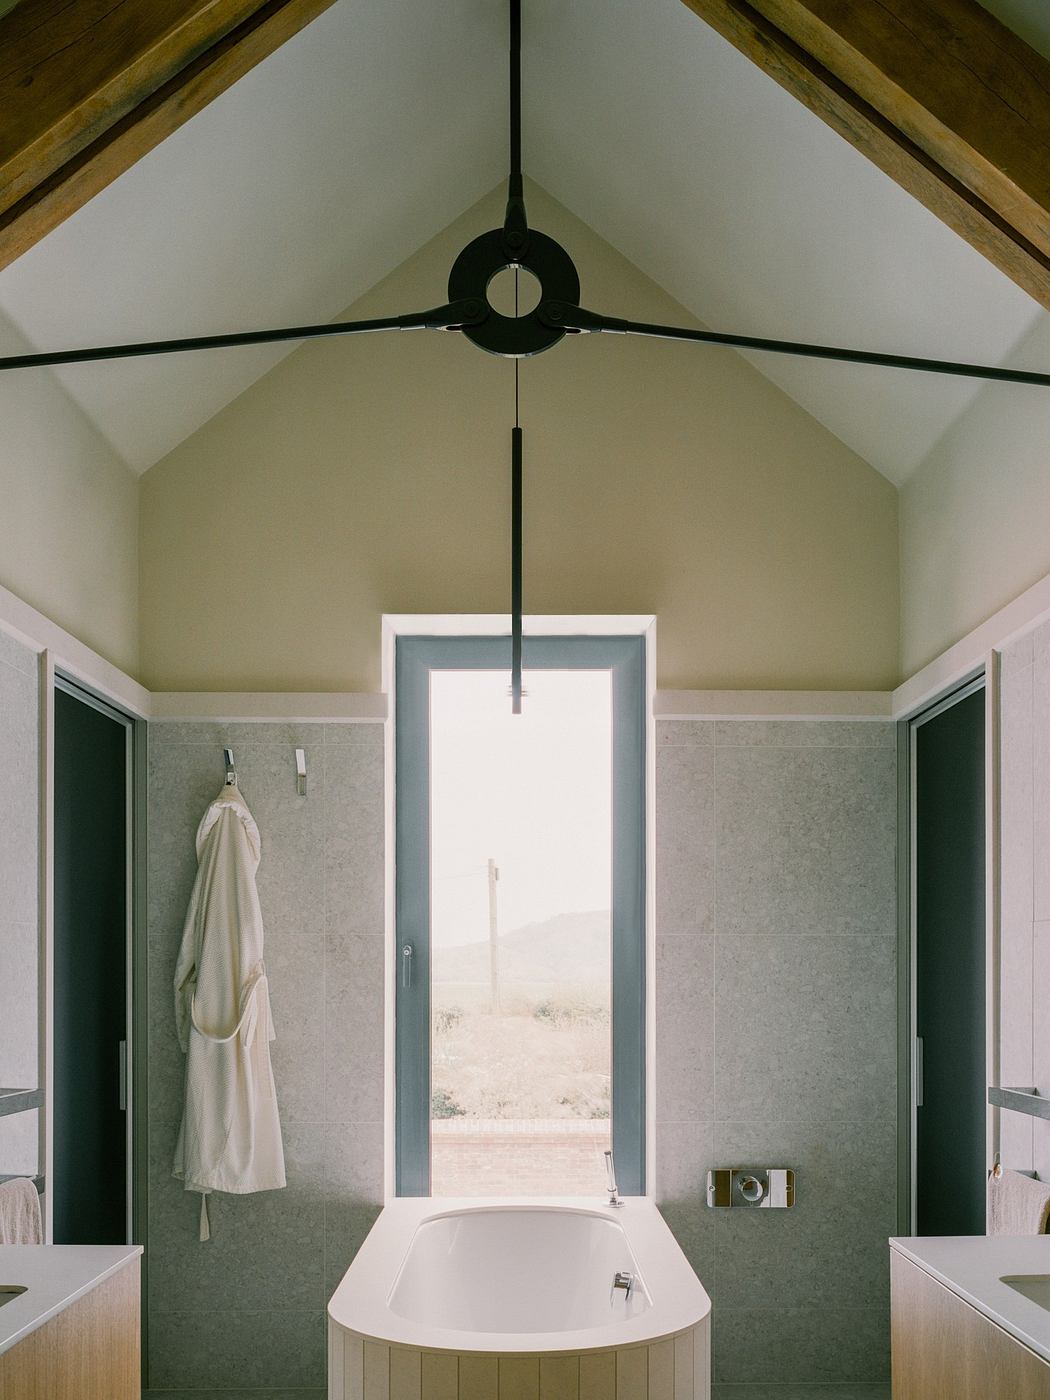 Minimalist bathroom with a vaulted ceiling and central window.